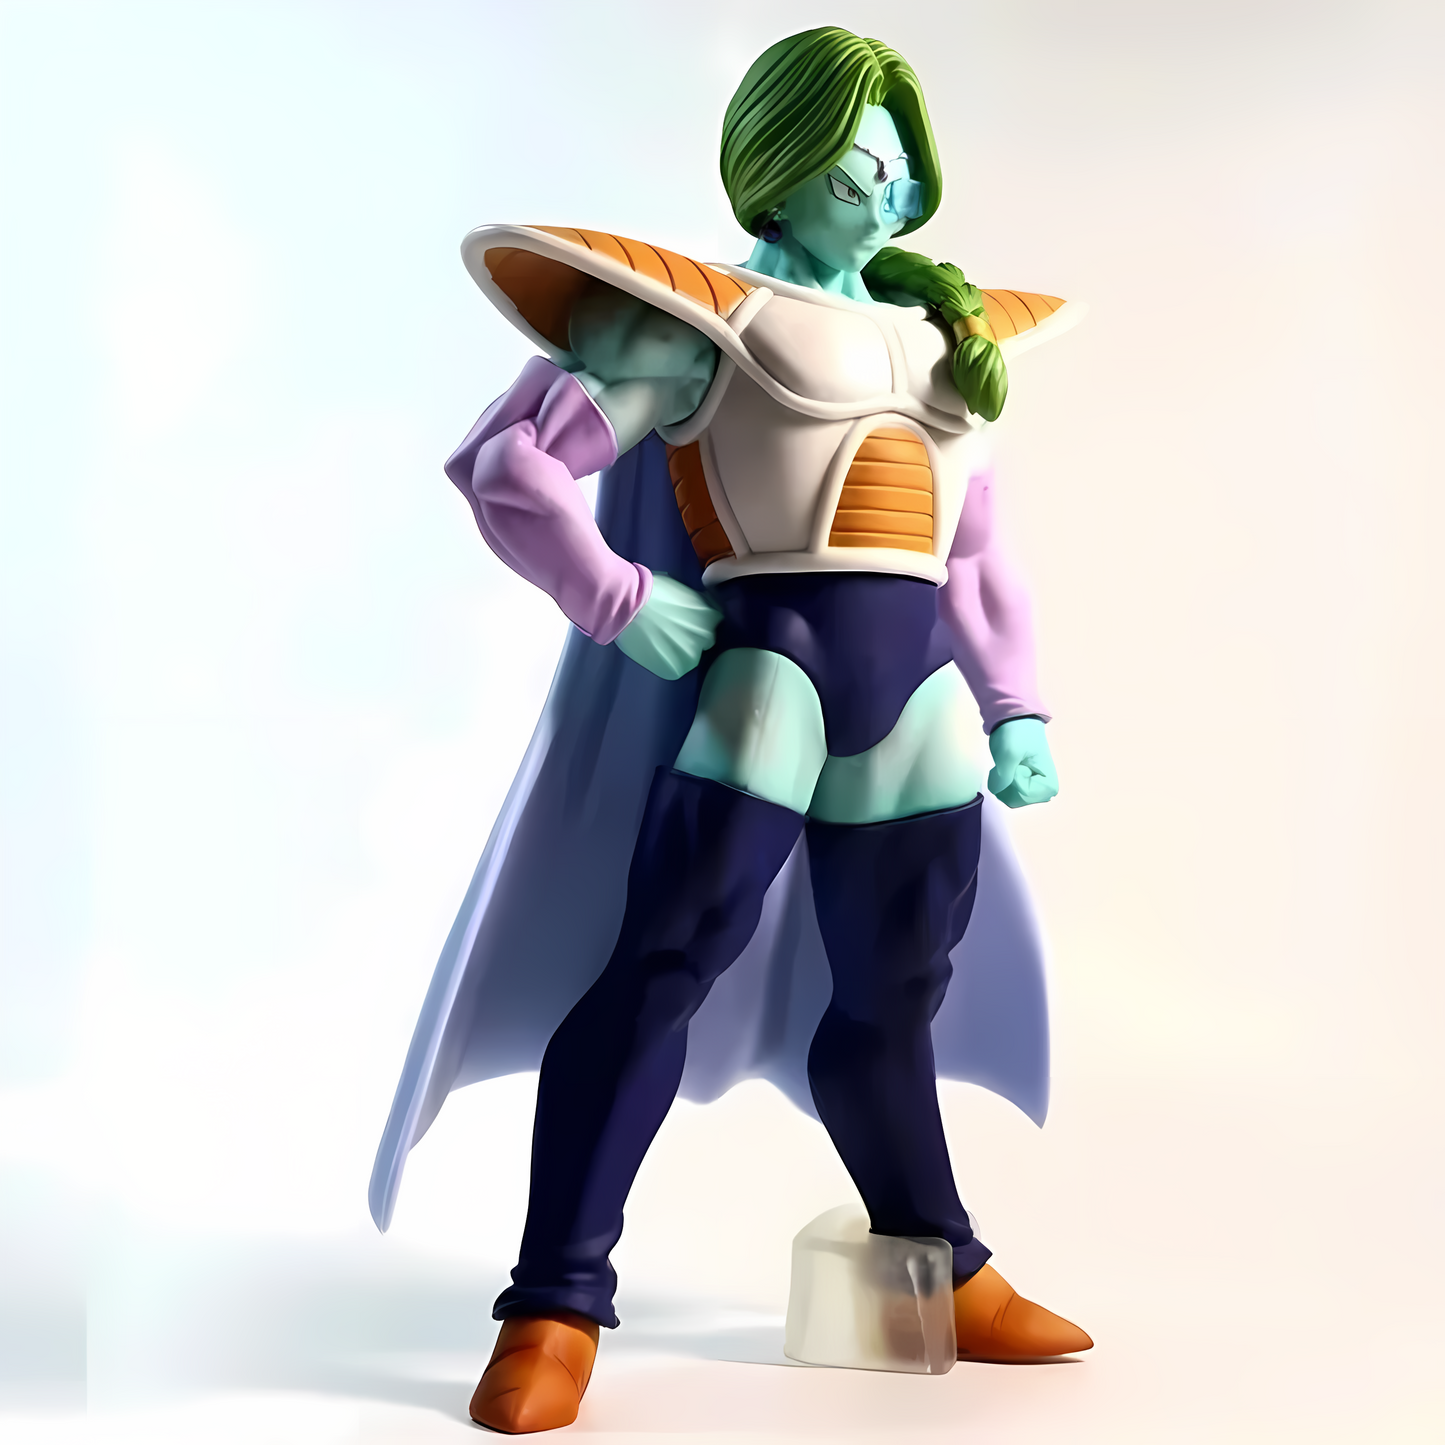 Sleek and stylish Zarbon Dragon Ball figure rendered in high detail, capturing the character's signature look, ideal for collectors seeking unique Dragon Ball collectibles.